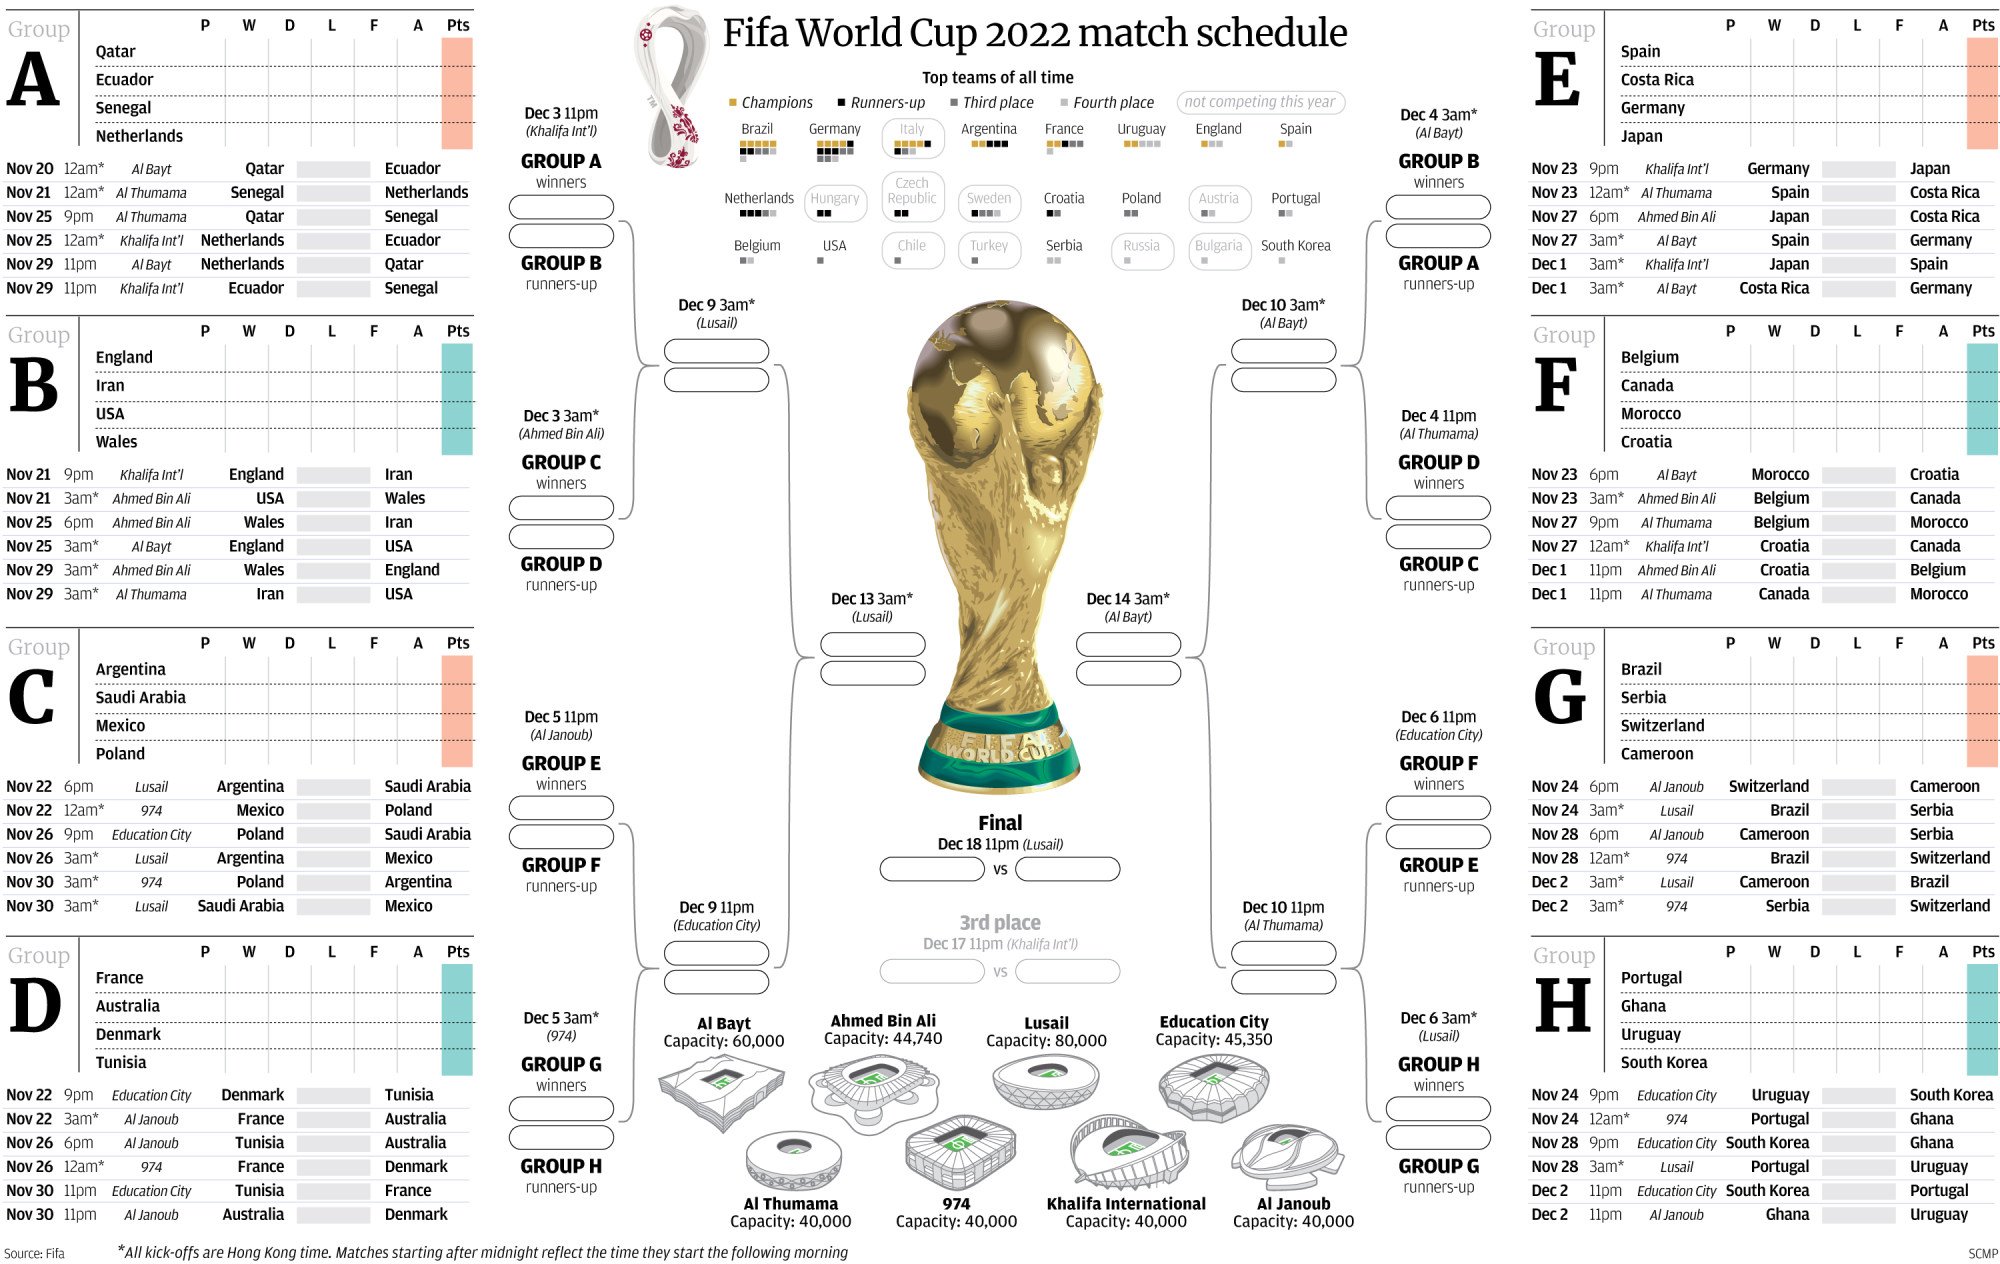 World Cup 2022 wallchart: Download your FREE guide to Qatar